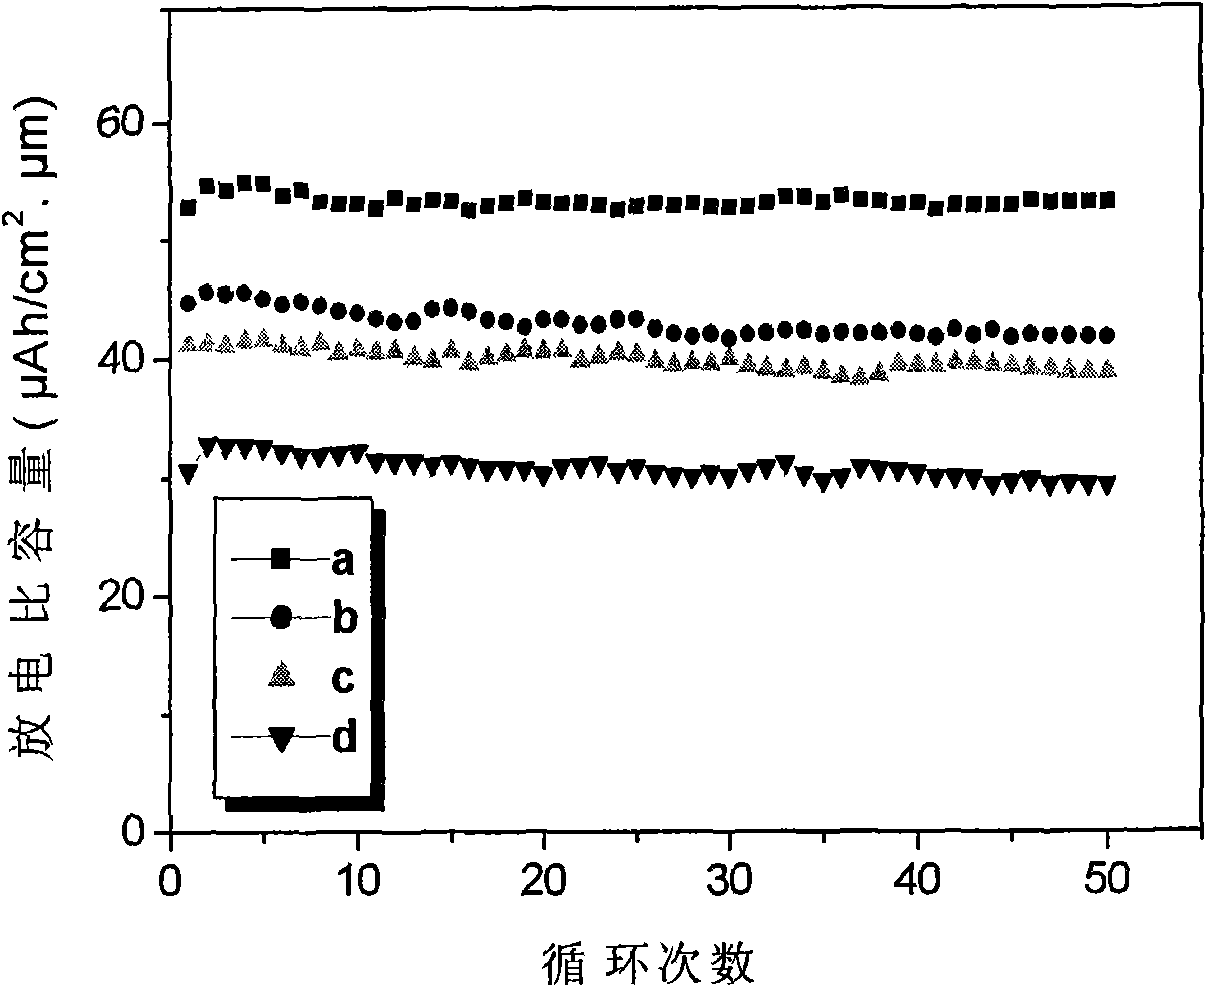 Preparation method of nano-silver particle dispersed Li4Ti5O12 thin film lithium ion battery negative electrode